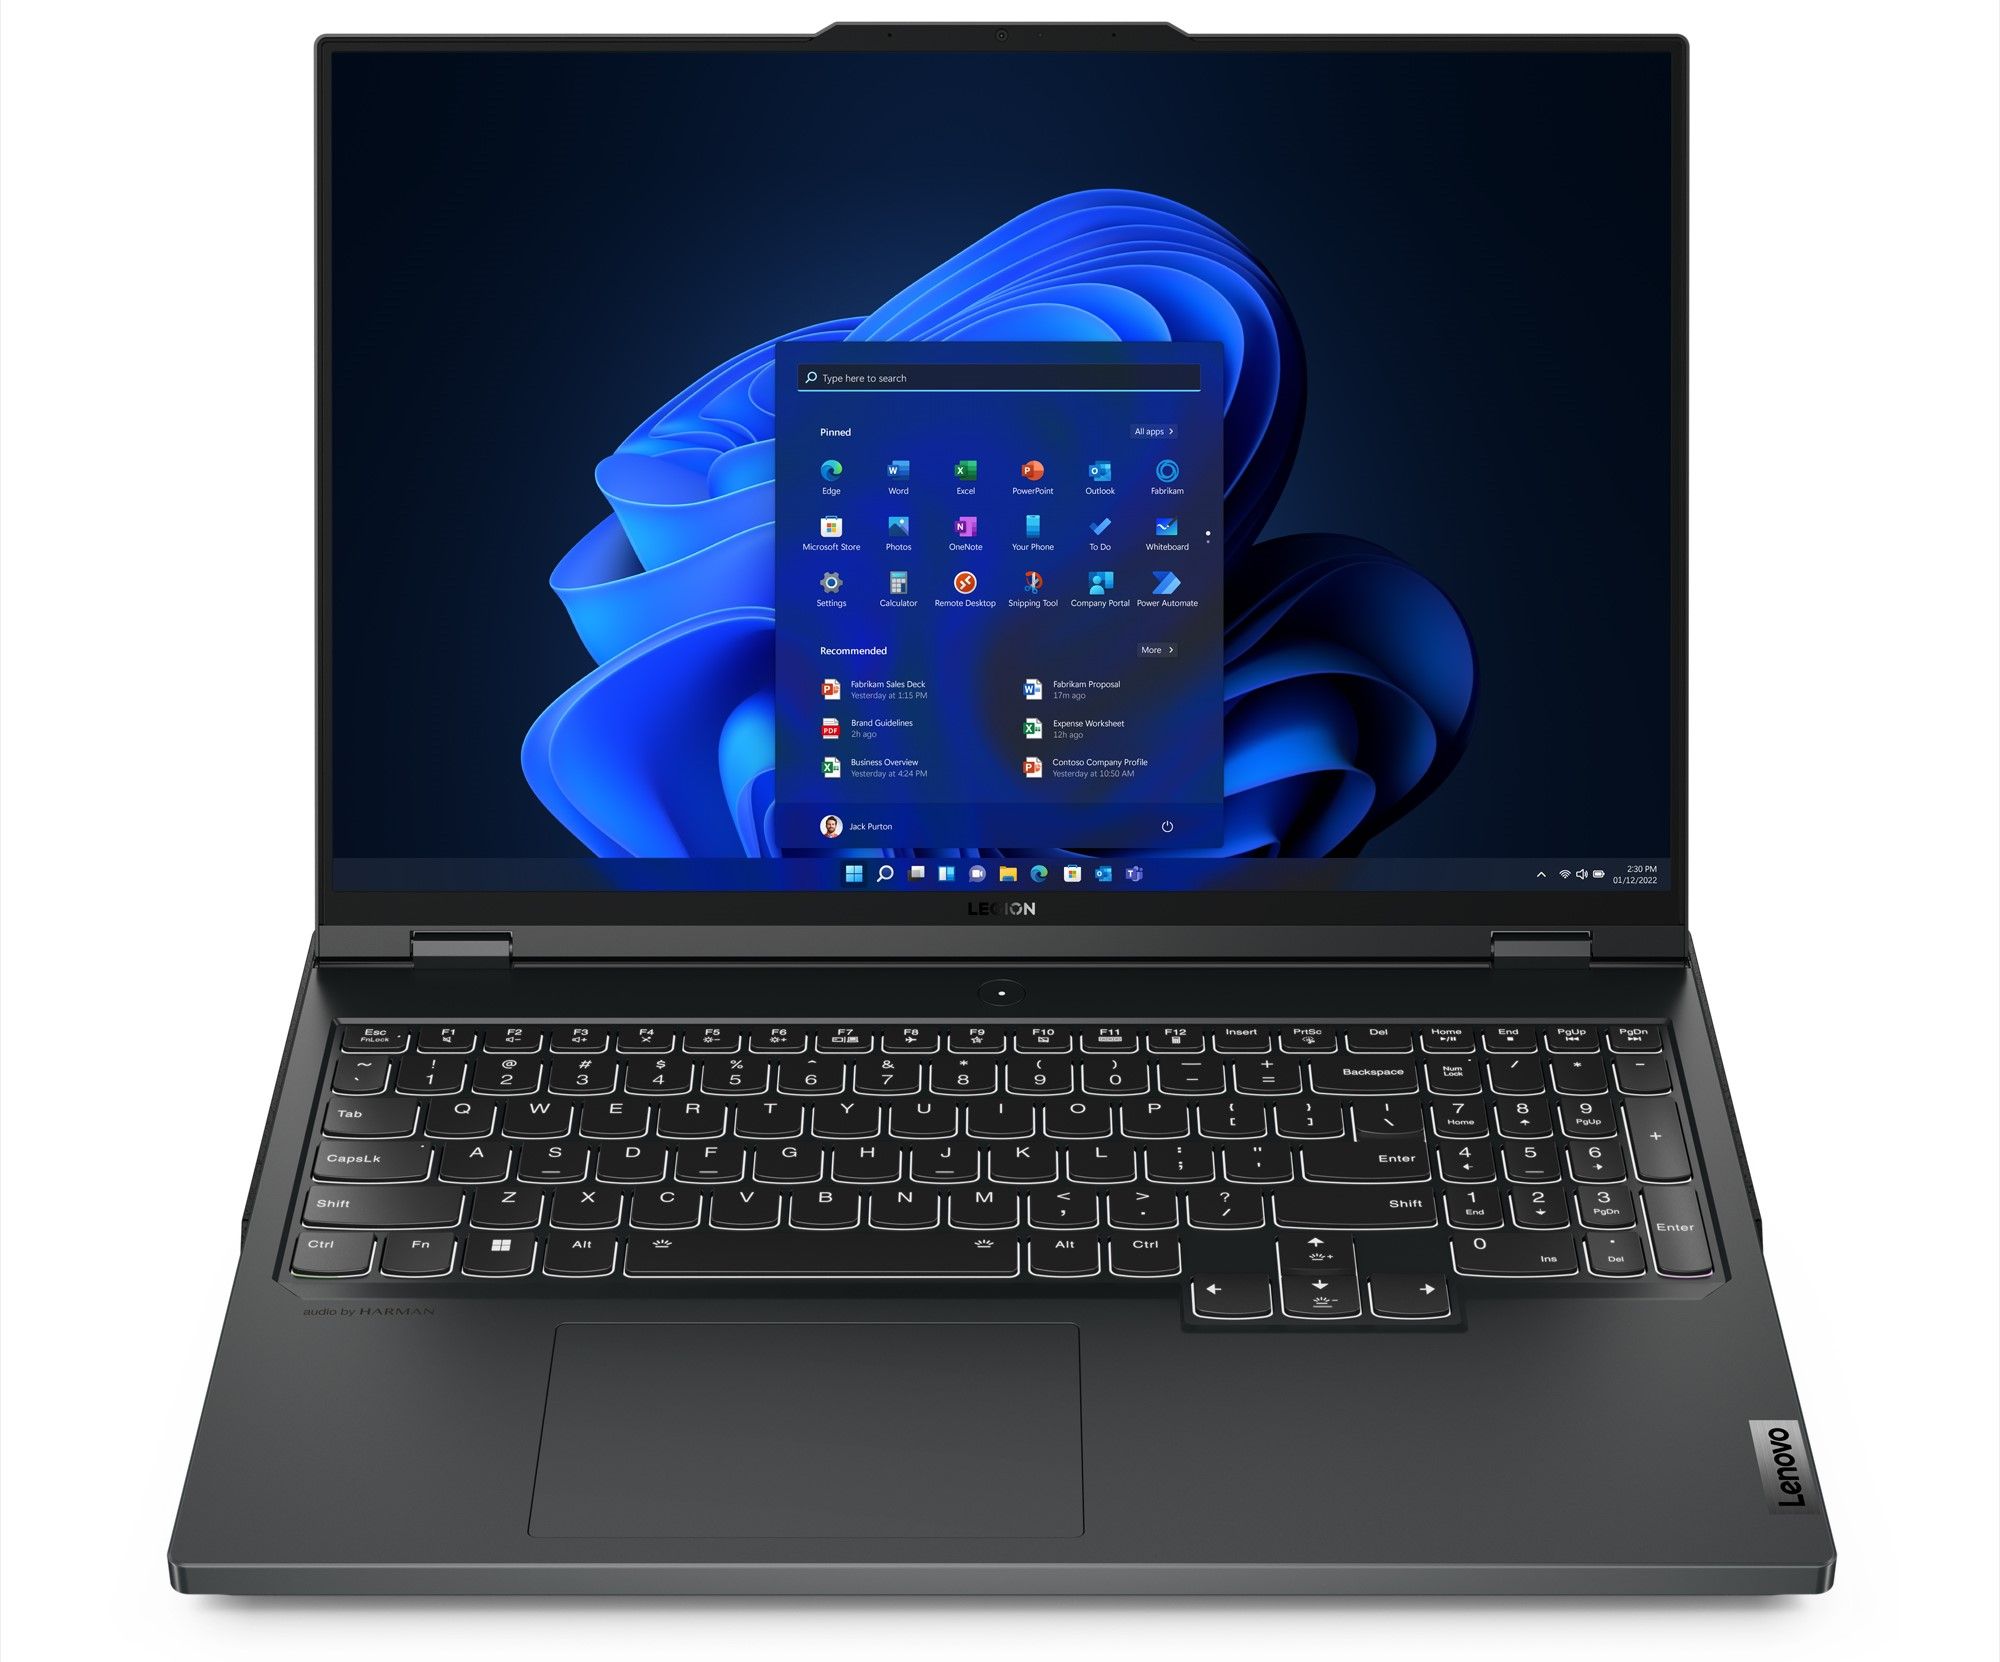 Front view of the Lenovo legion Pro 7i with the lid open